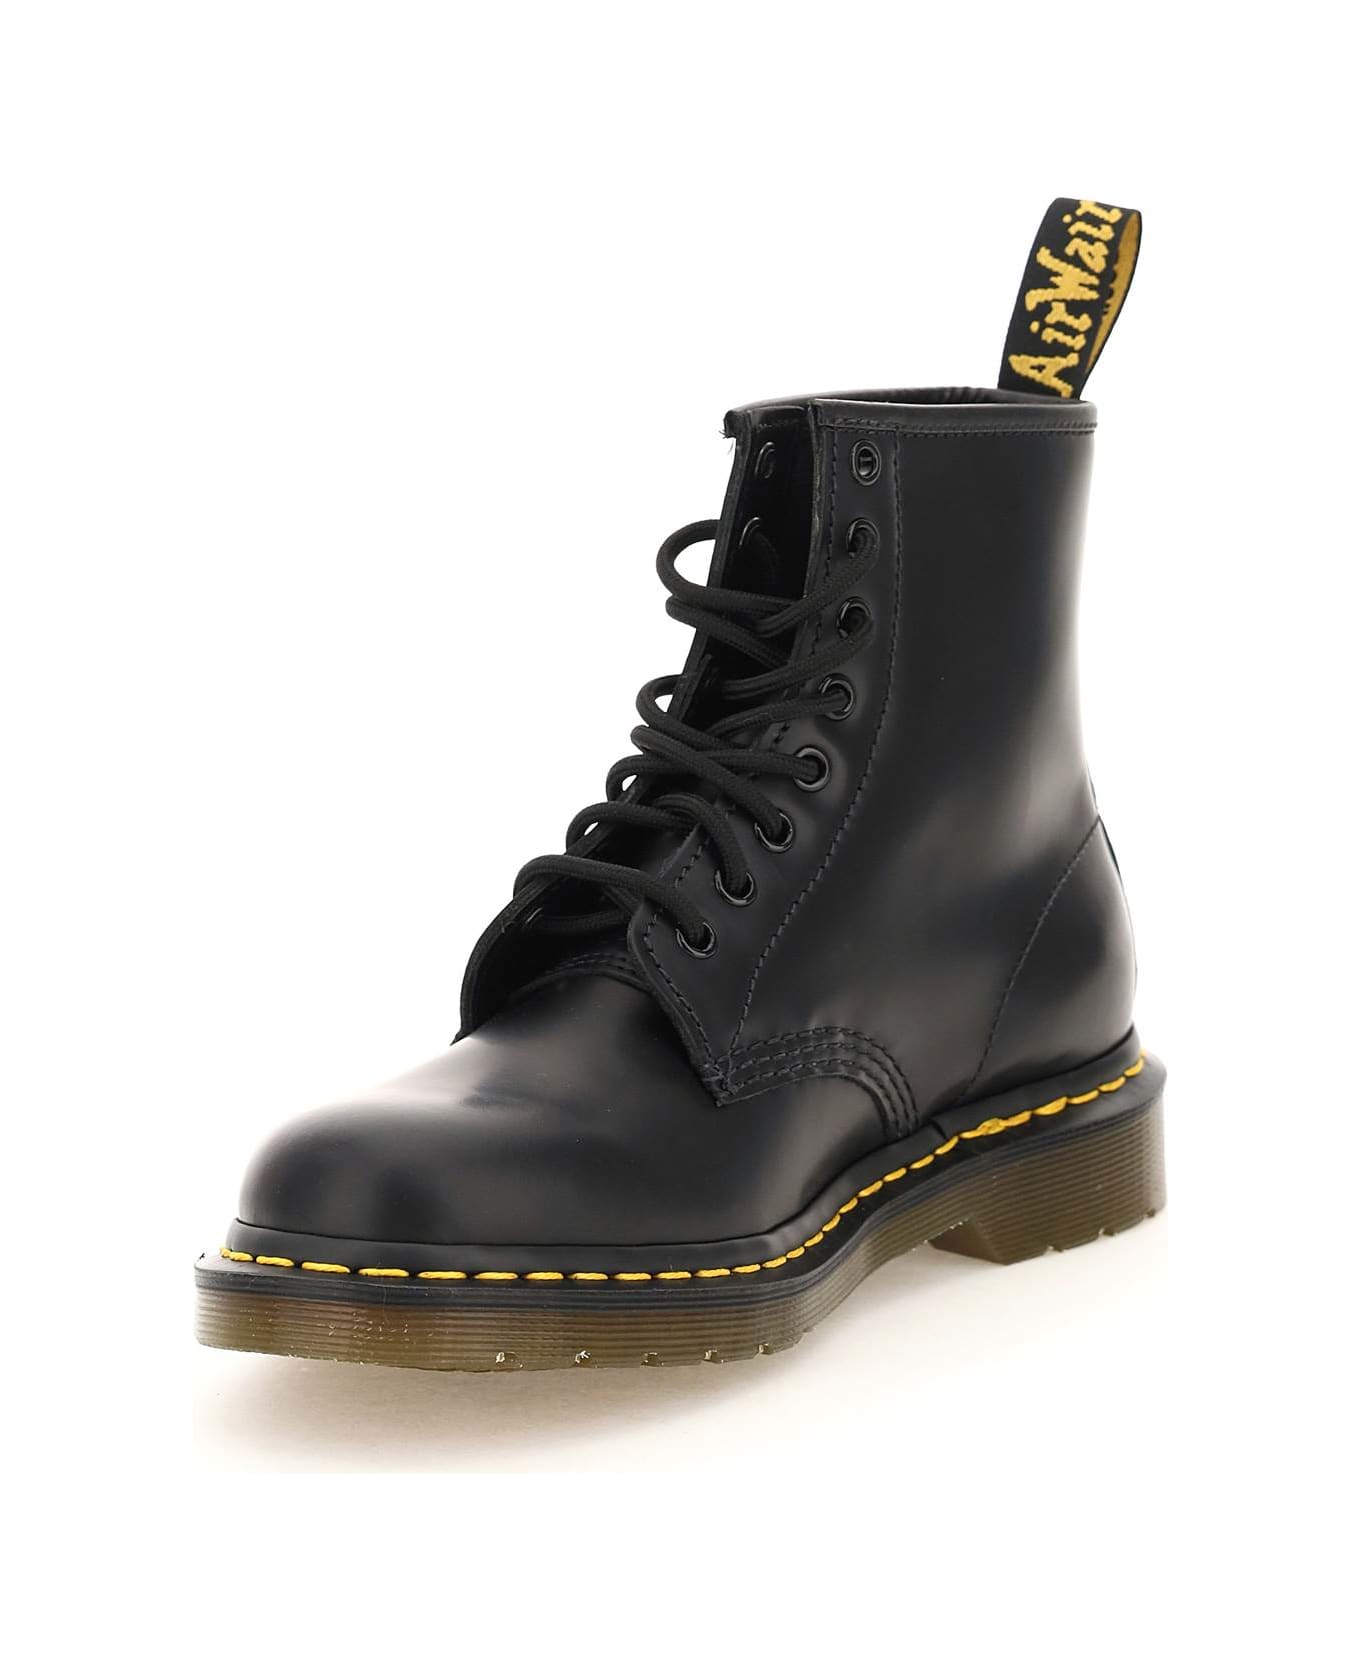 Dr. Martens 1460 Smooth Leather Combat Boots - Black